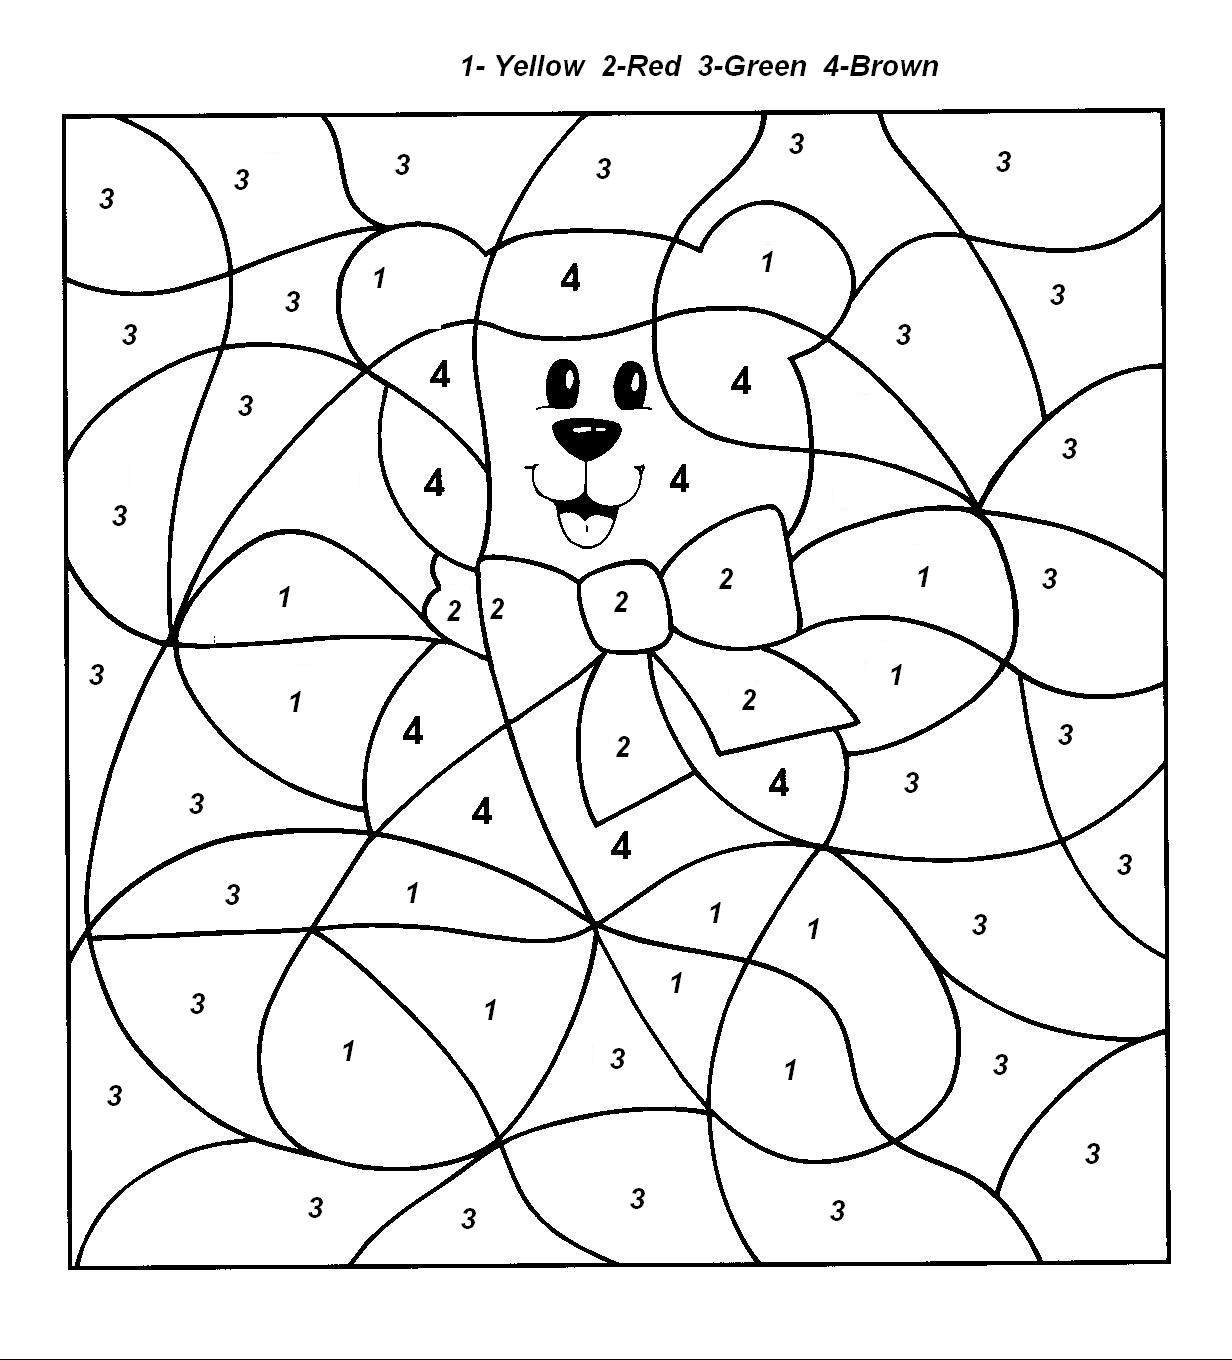 Coloring page: Coloring by numbers (Educational) #125525 - Printable coloring pages